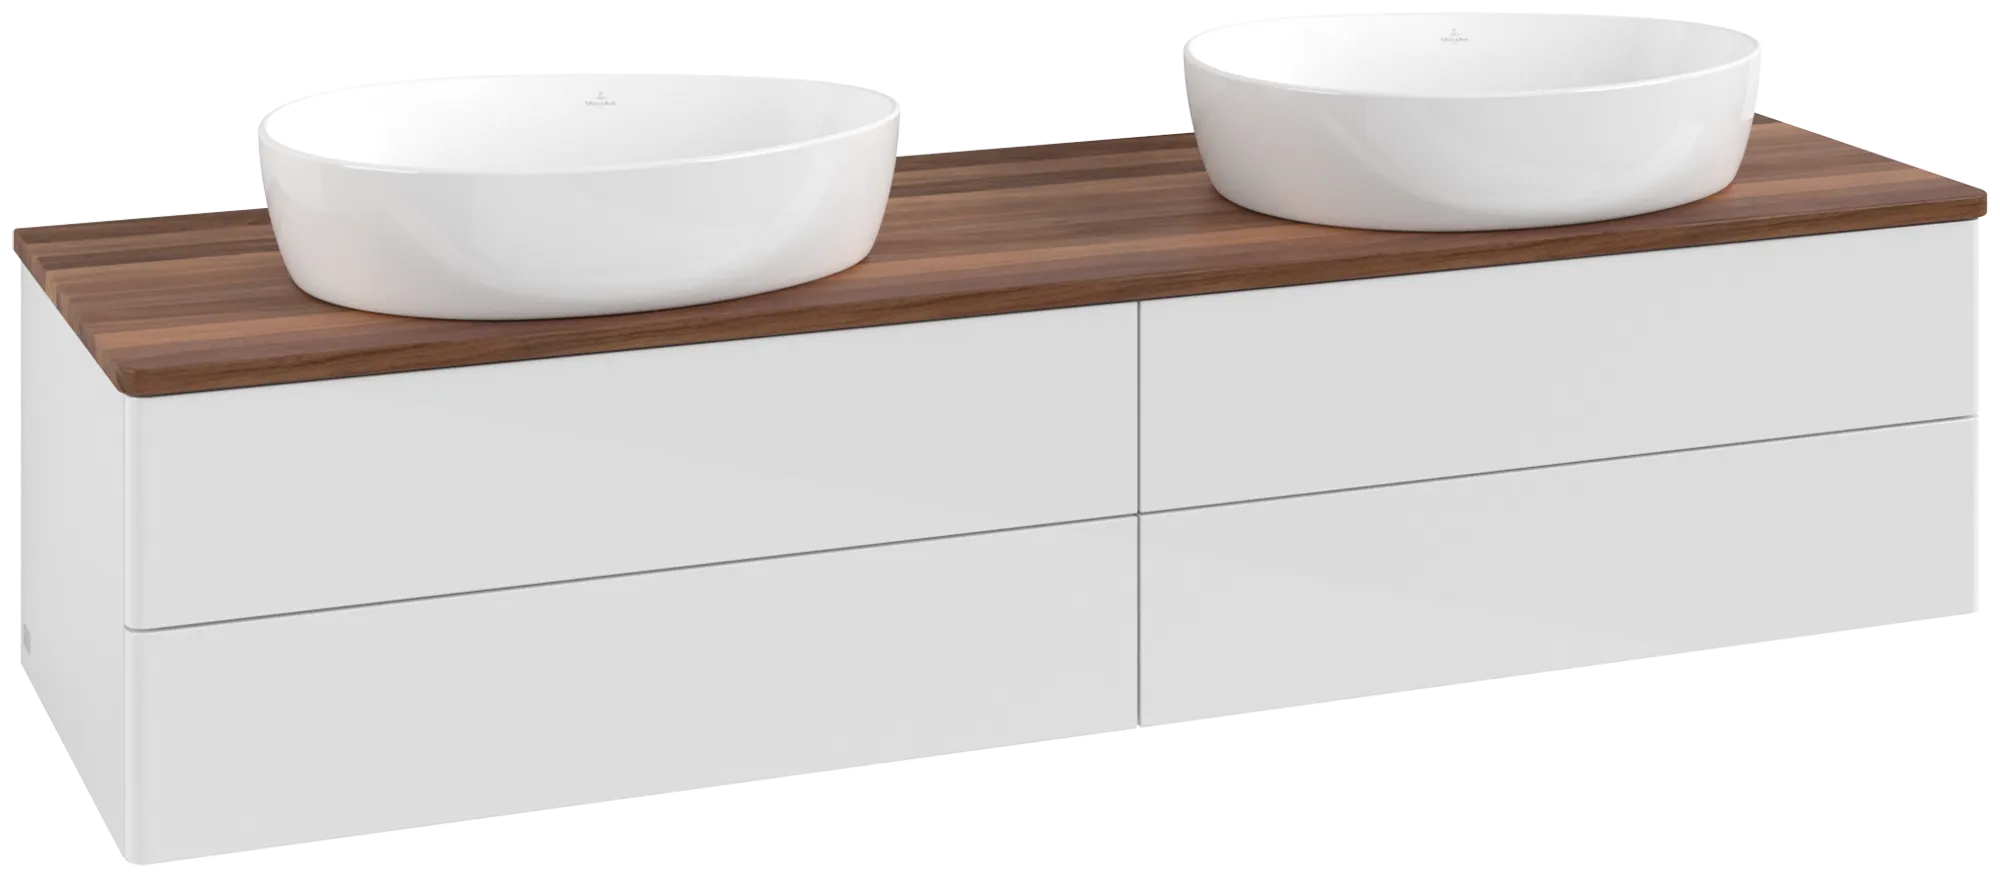 Picture of VILLEROY BOCH Antao Vanity unit, with lighting, 4 pull-out compartments, 1600 x 360 x 500 mm, Front without structure, Glossy White Lacquer / Warm Walnut #L28012GF